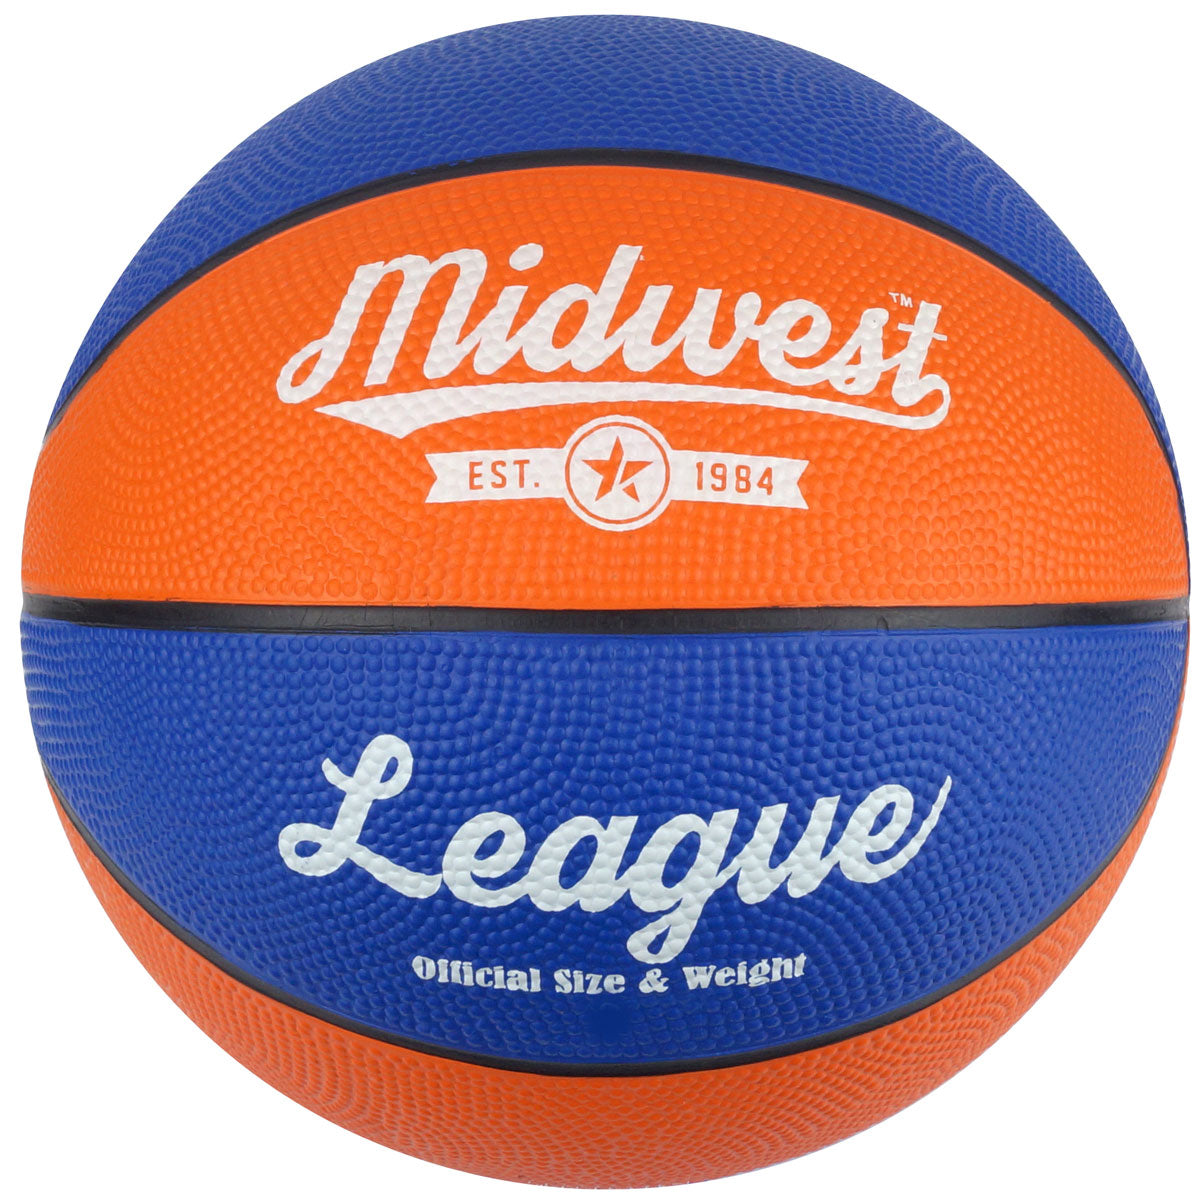 Midwest League Basketball - Size 7